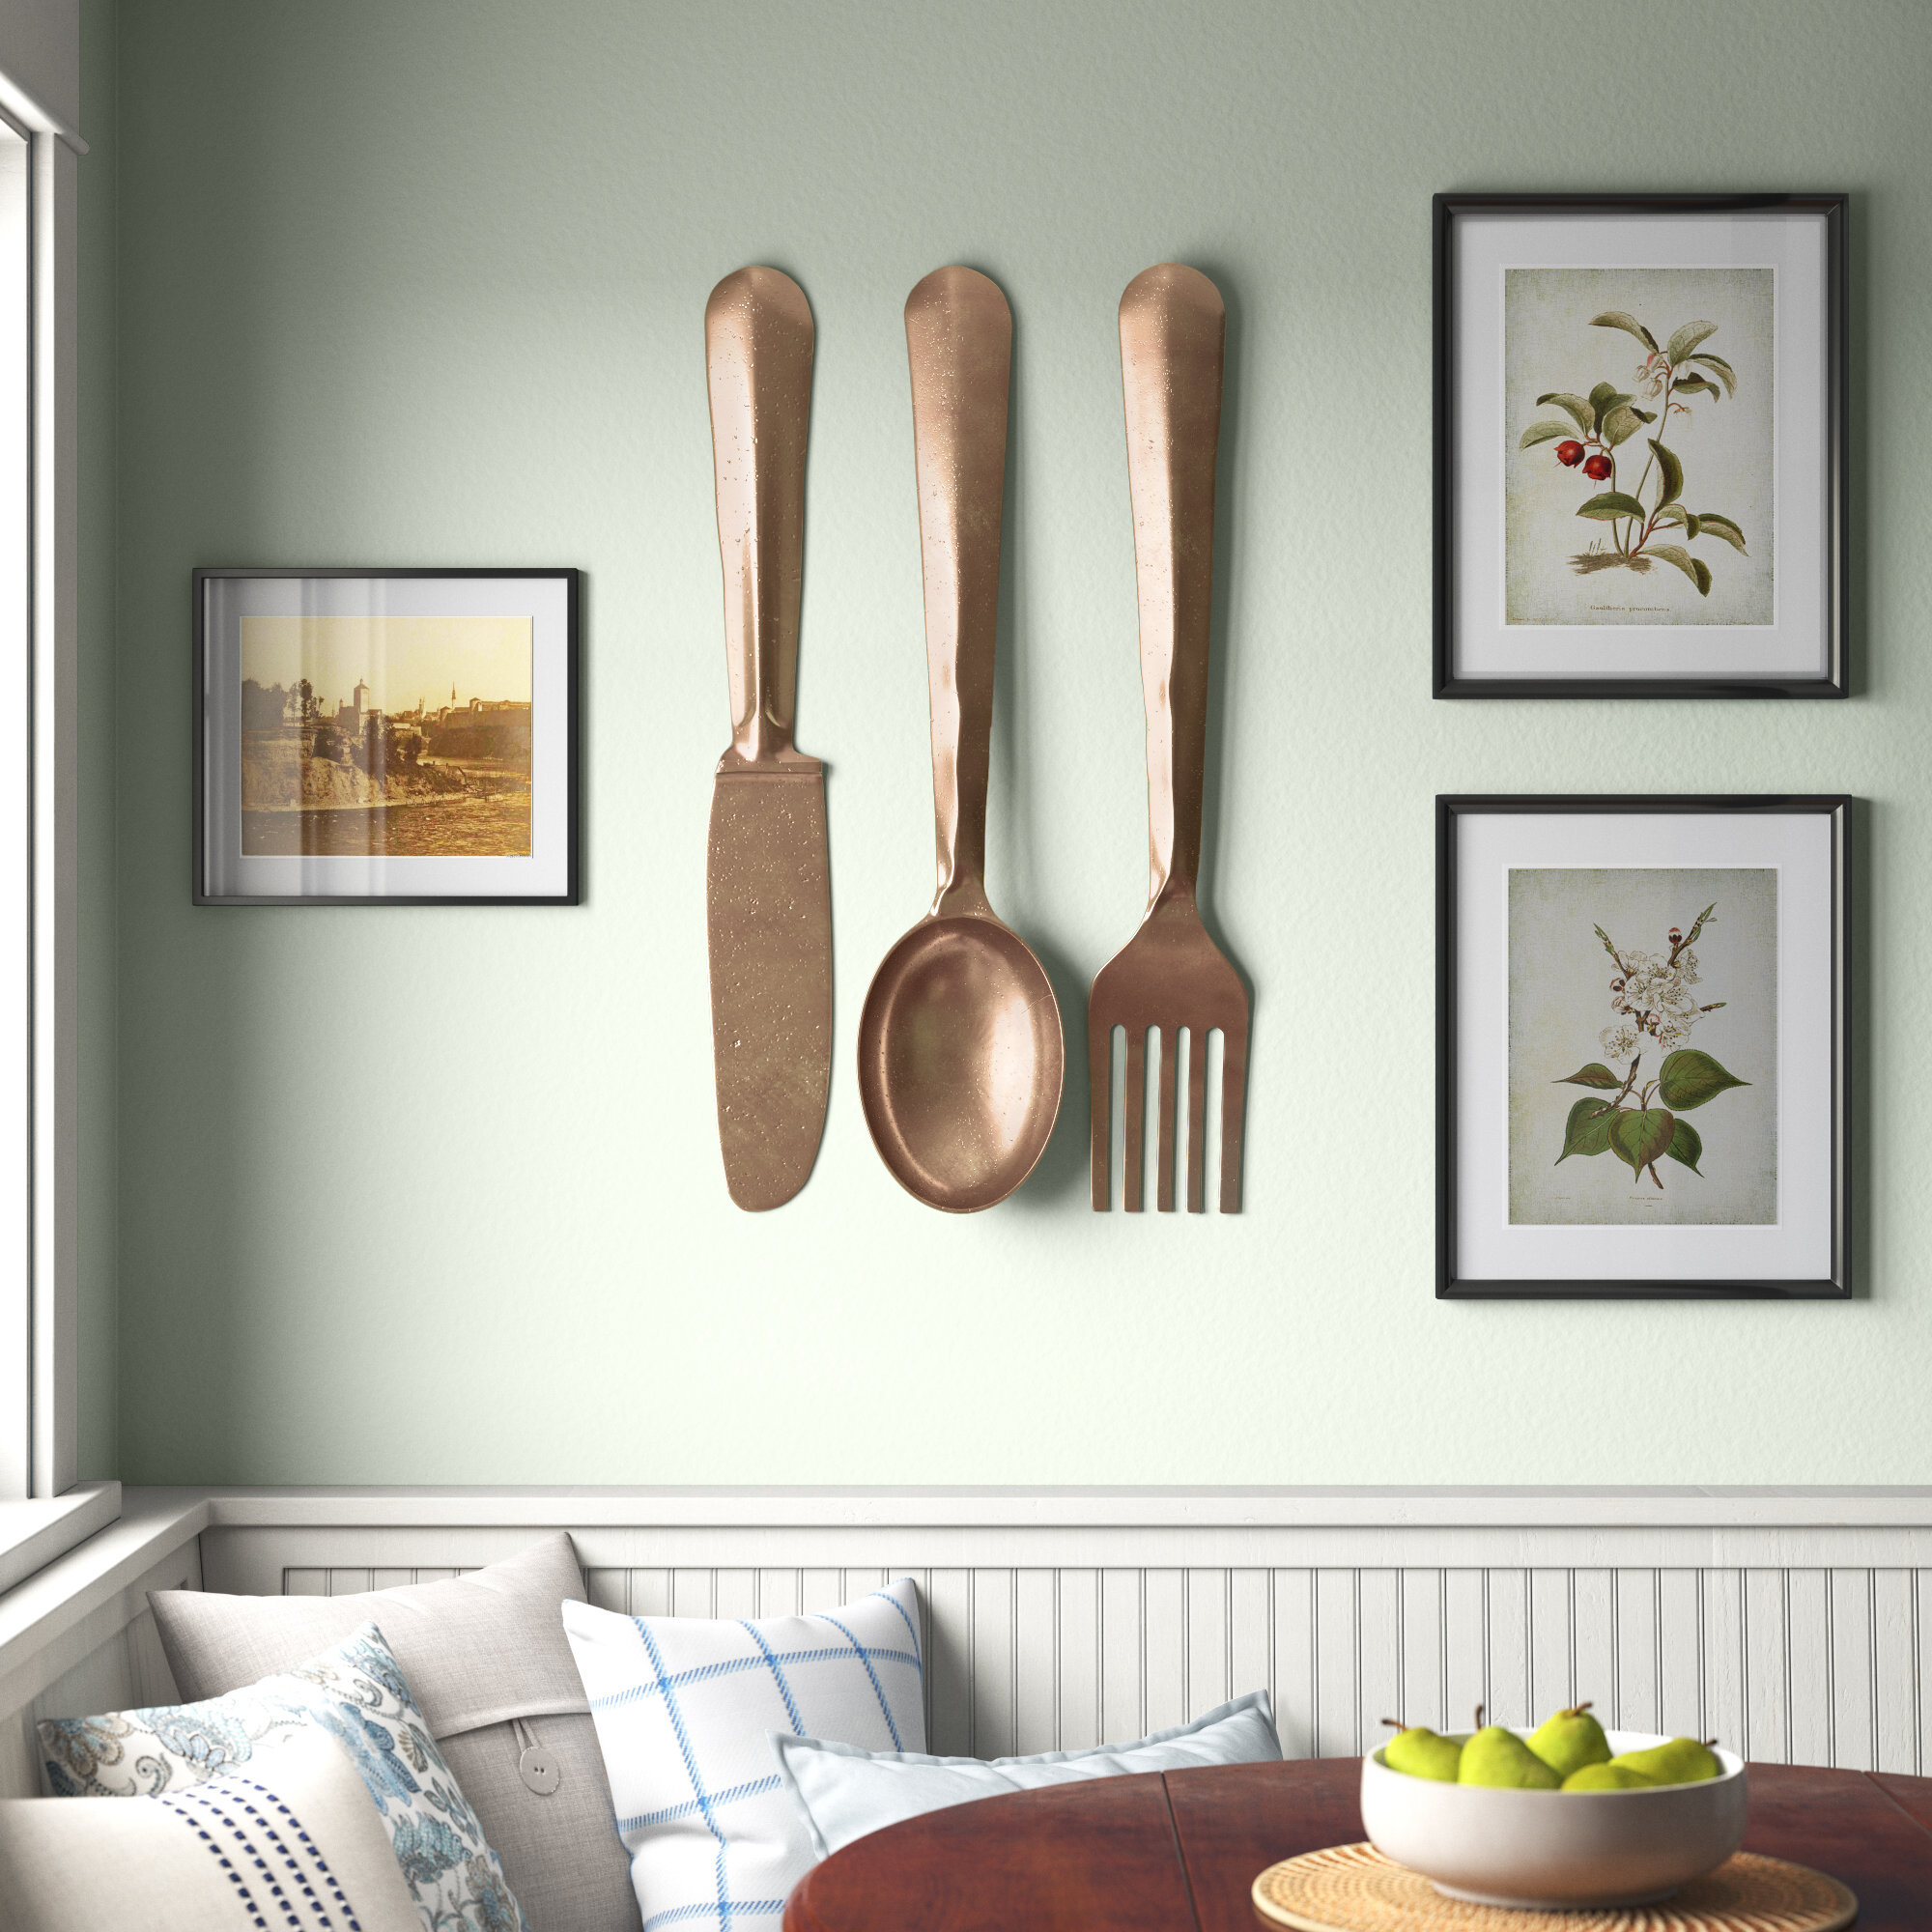 Set Of 3 Aluminum Metal Utensils Knife Spoon And Fork Wall Decors